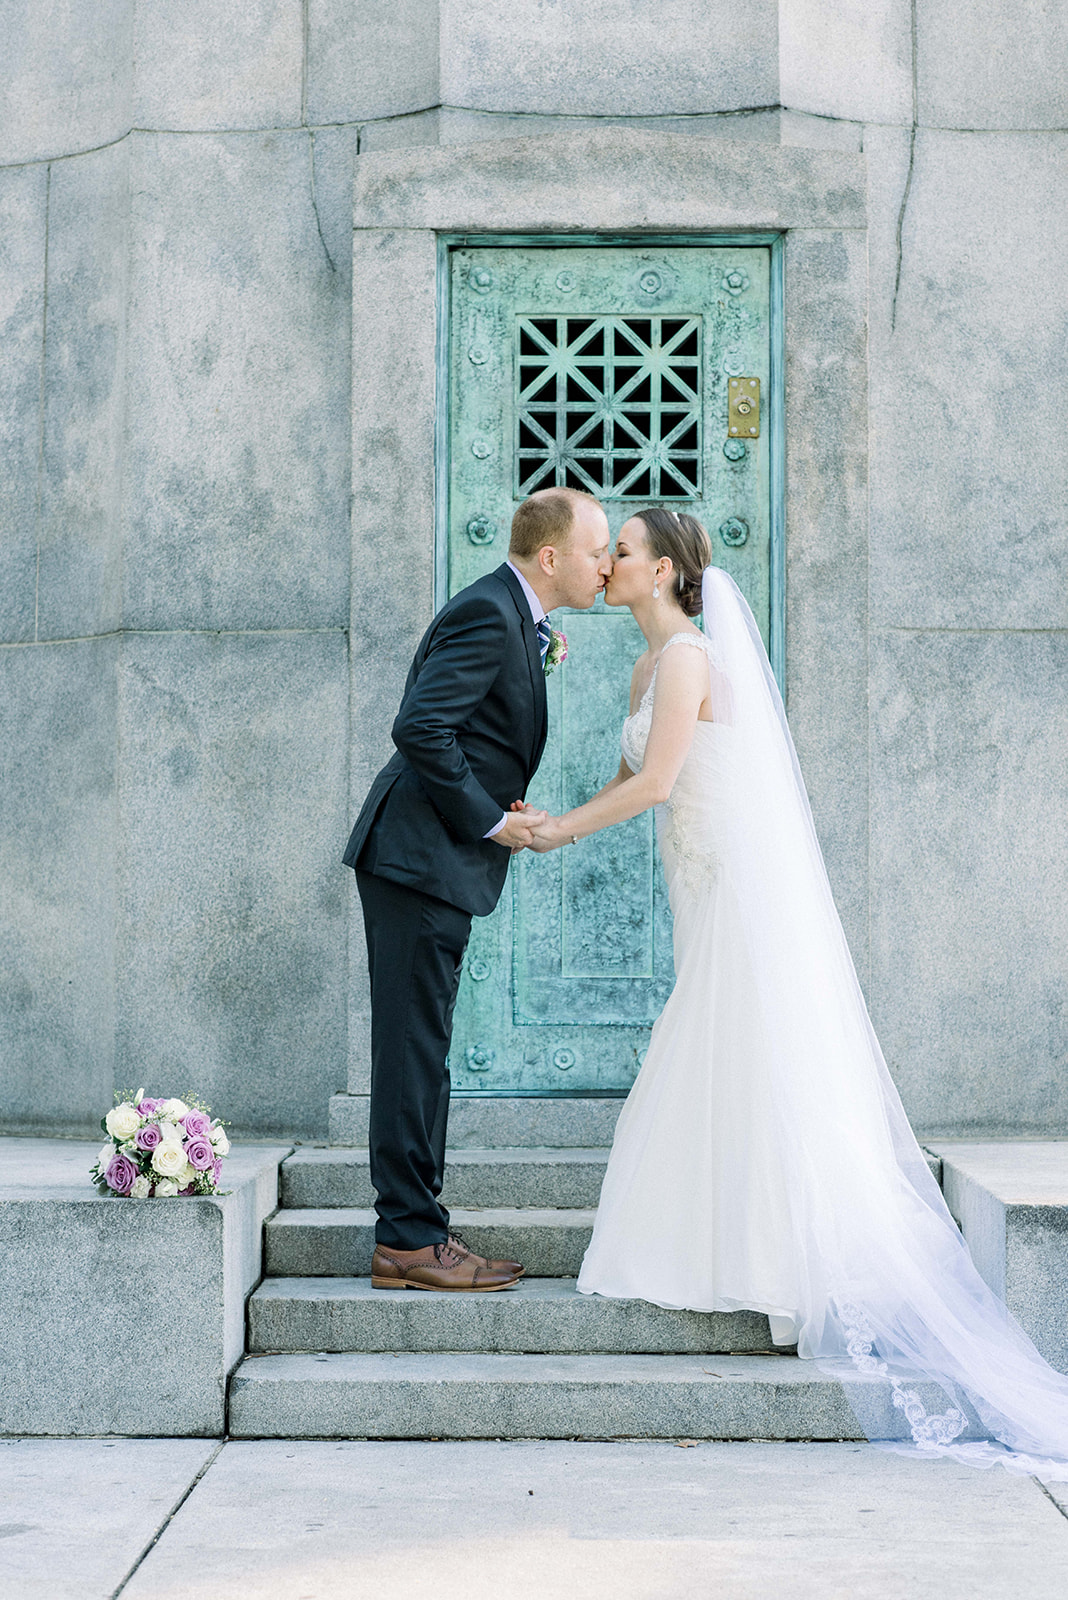 A Brooklyn Wedding and Portraits at the Park